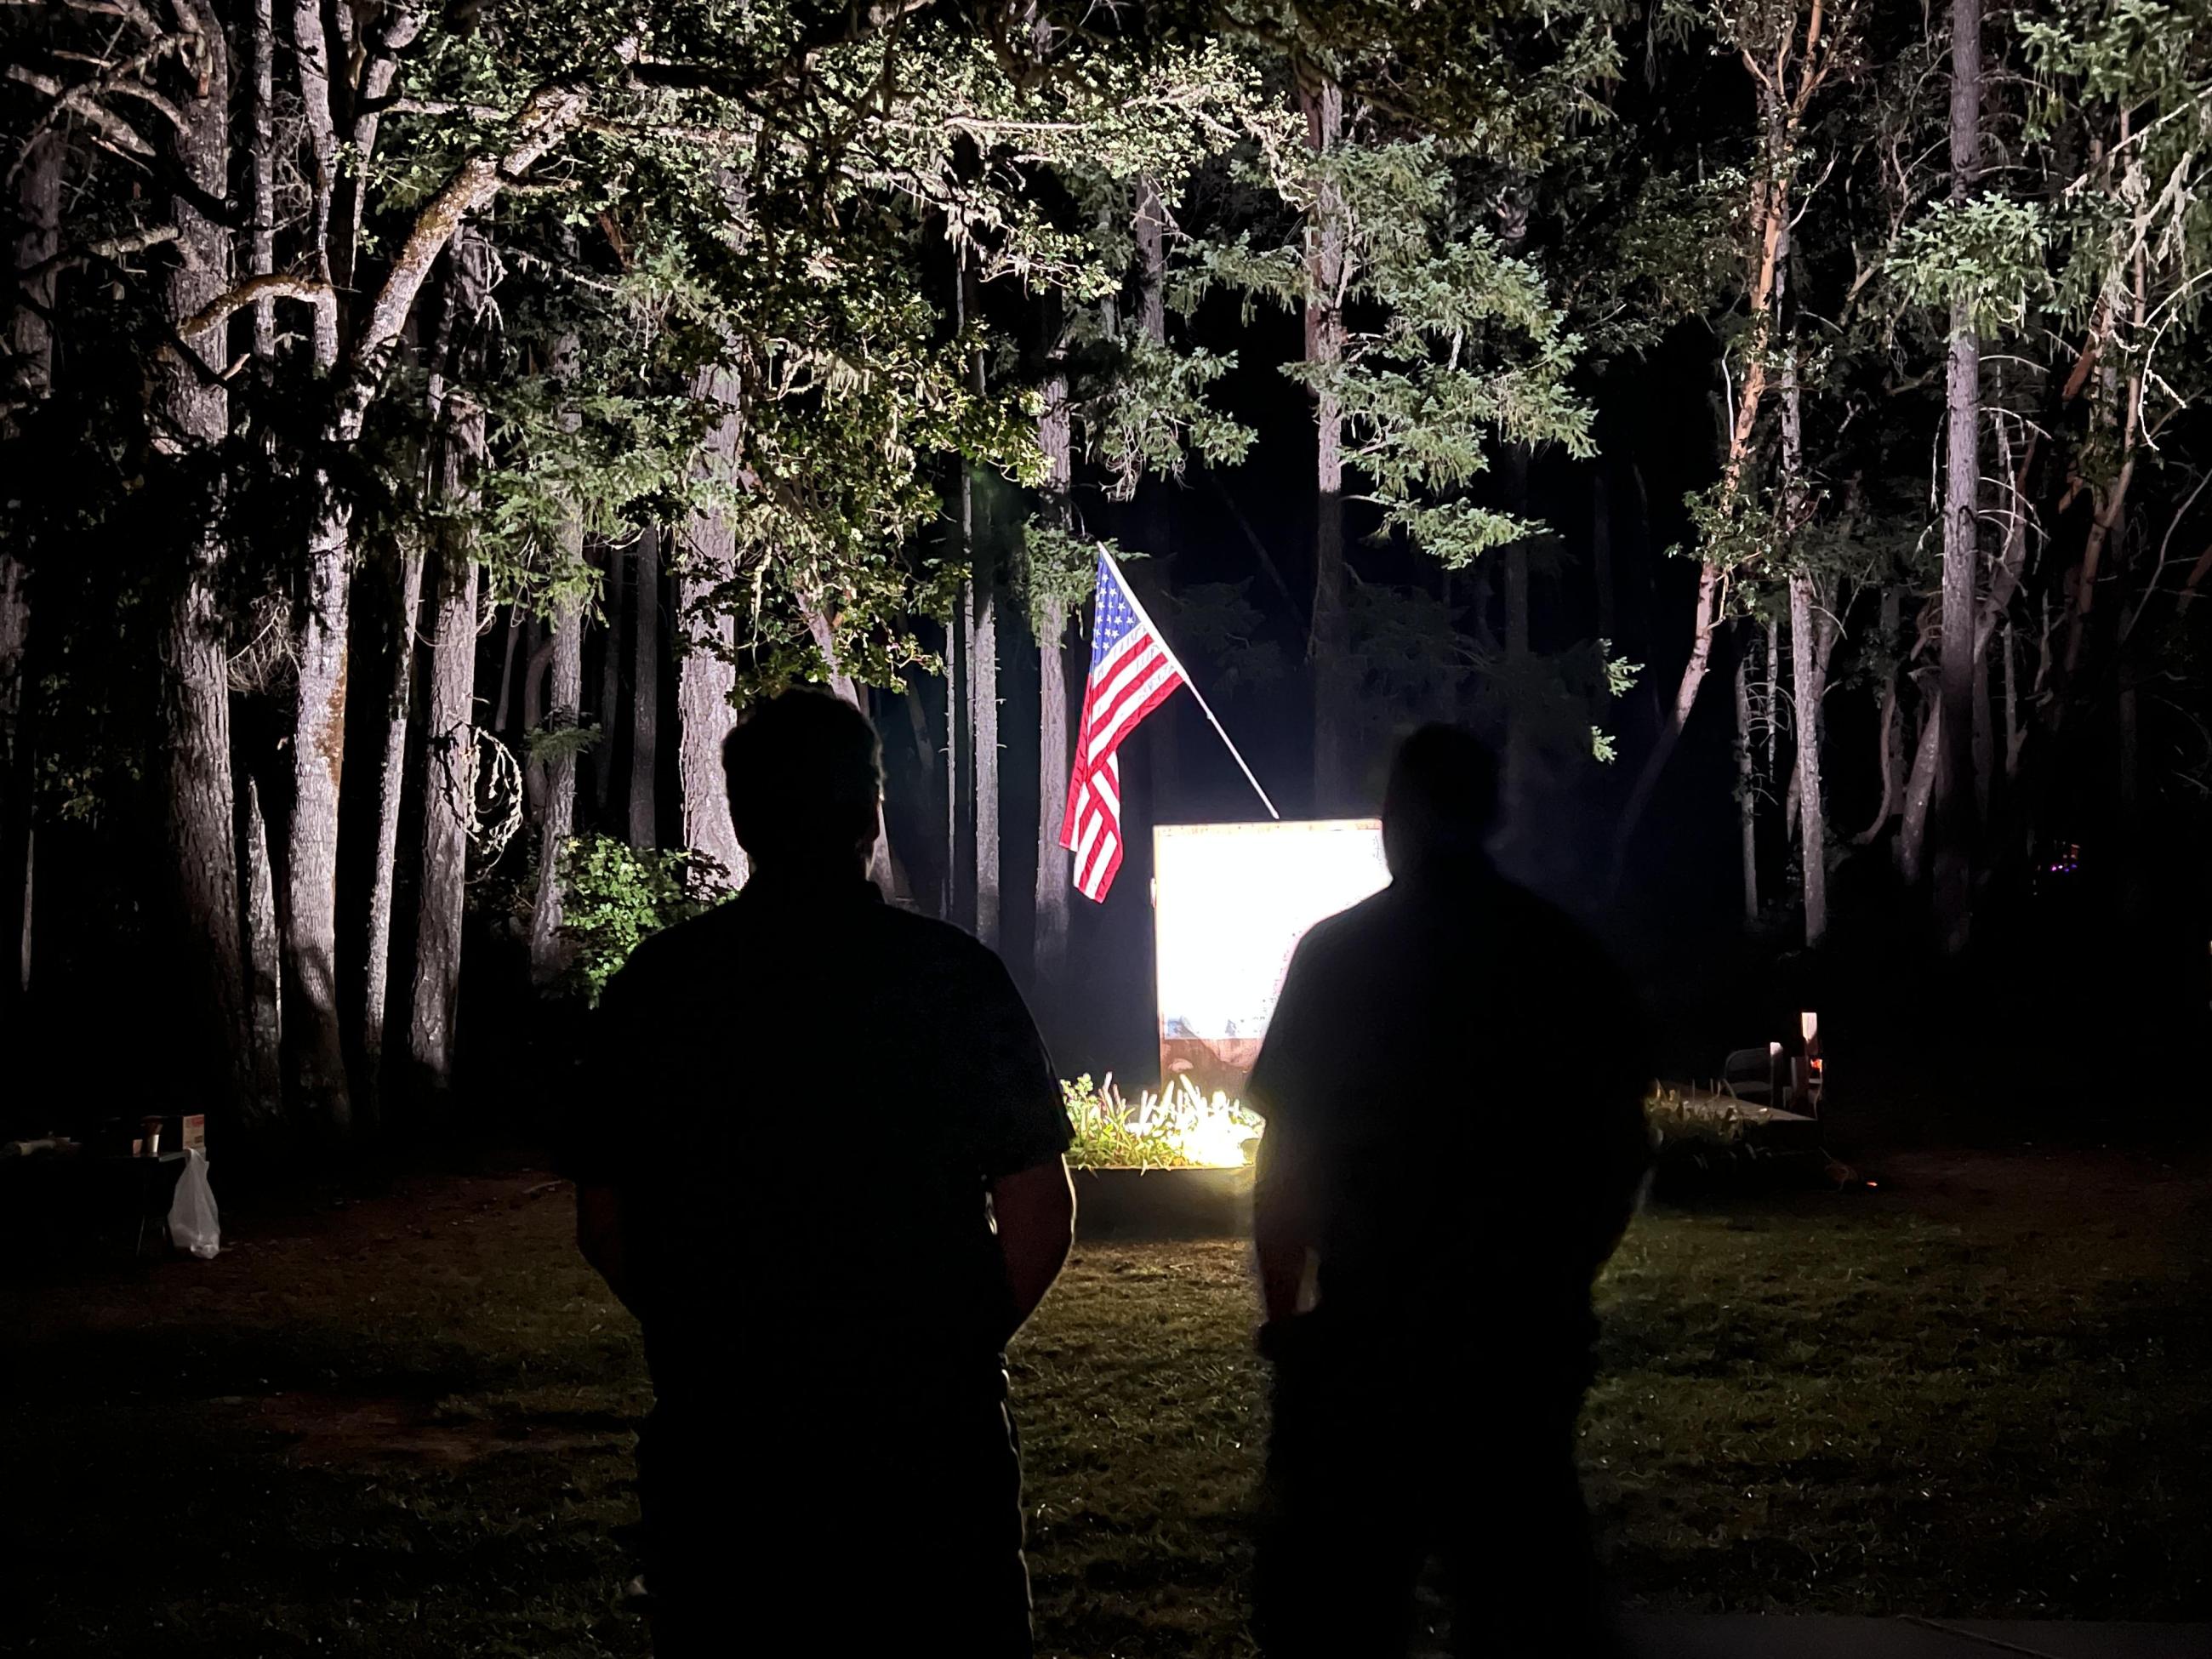 Two men silhouetted observing the flag lit up at night.